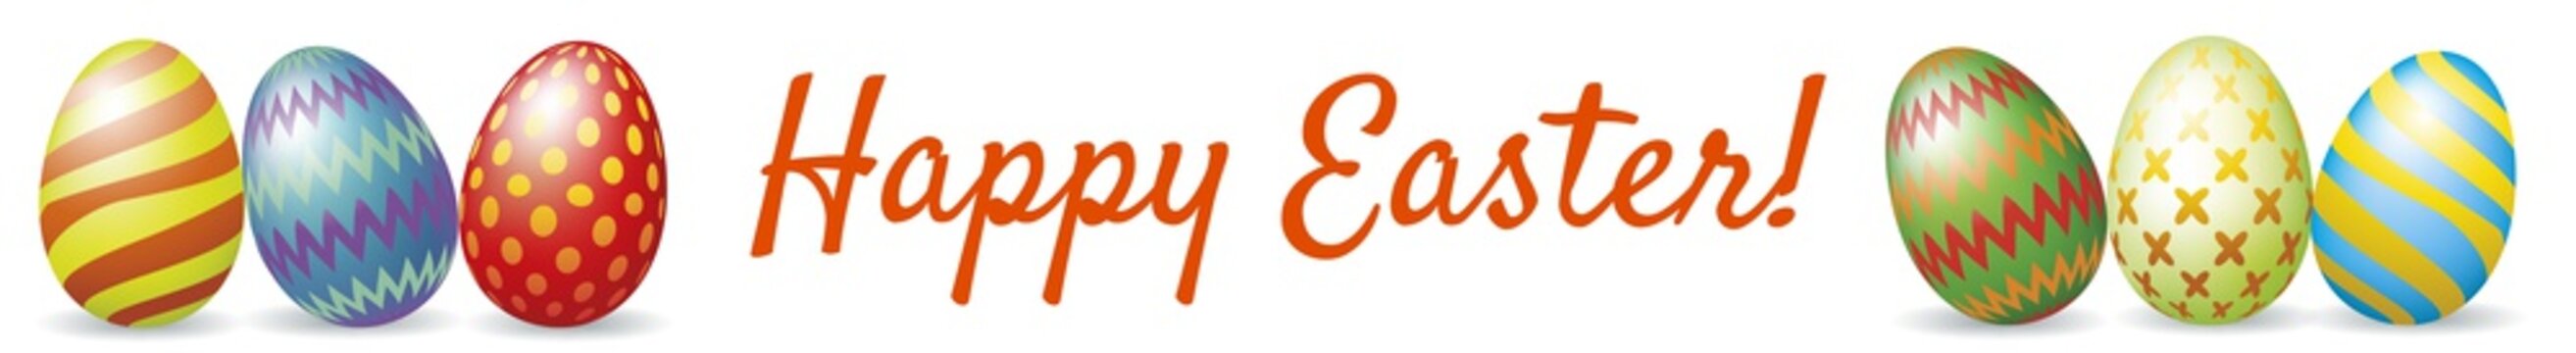 Happy Easter web banner